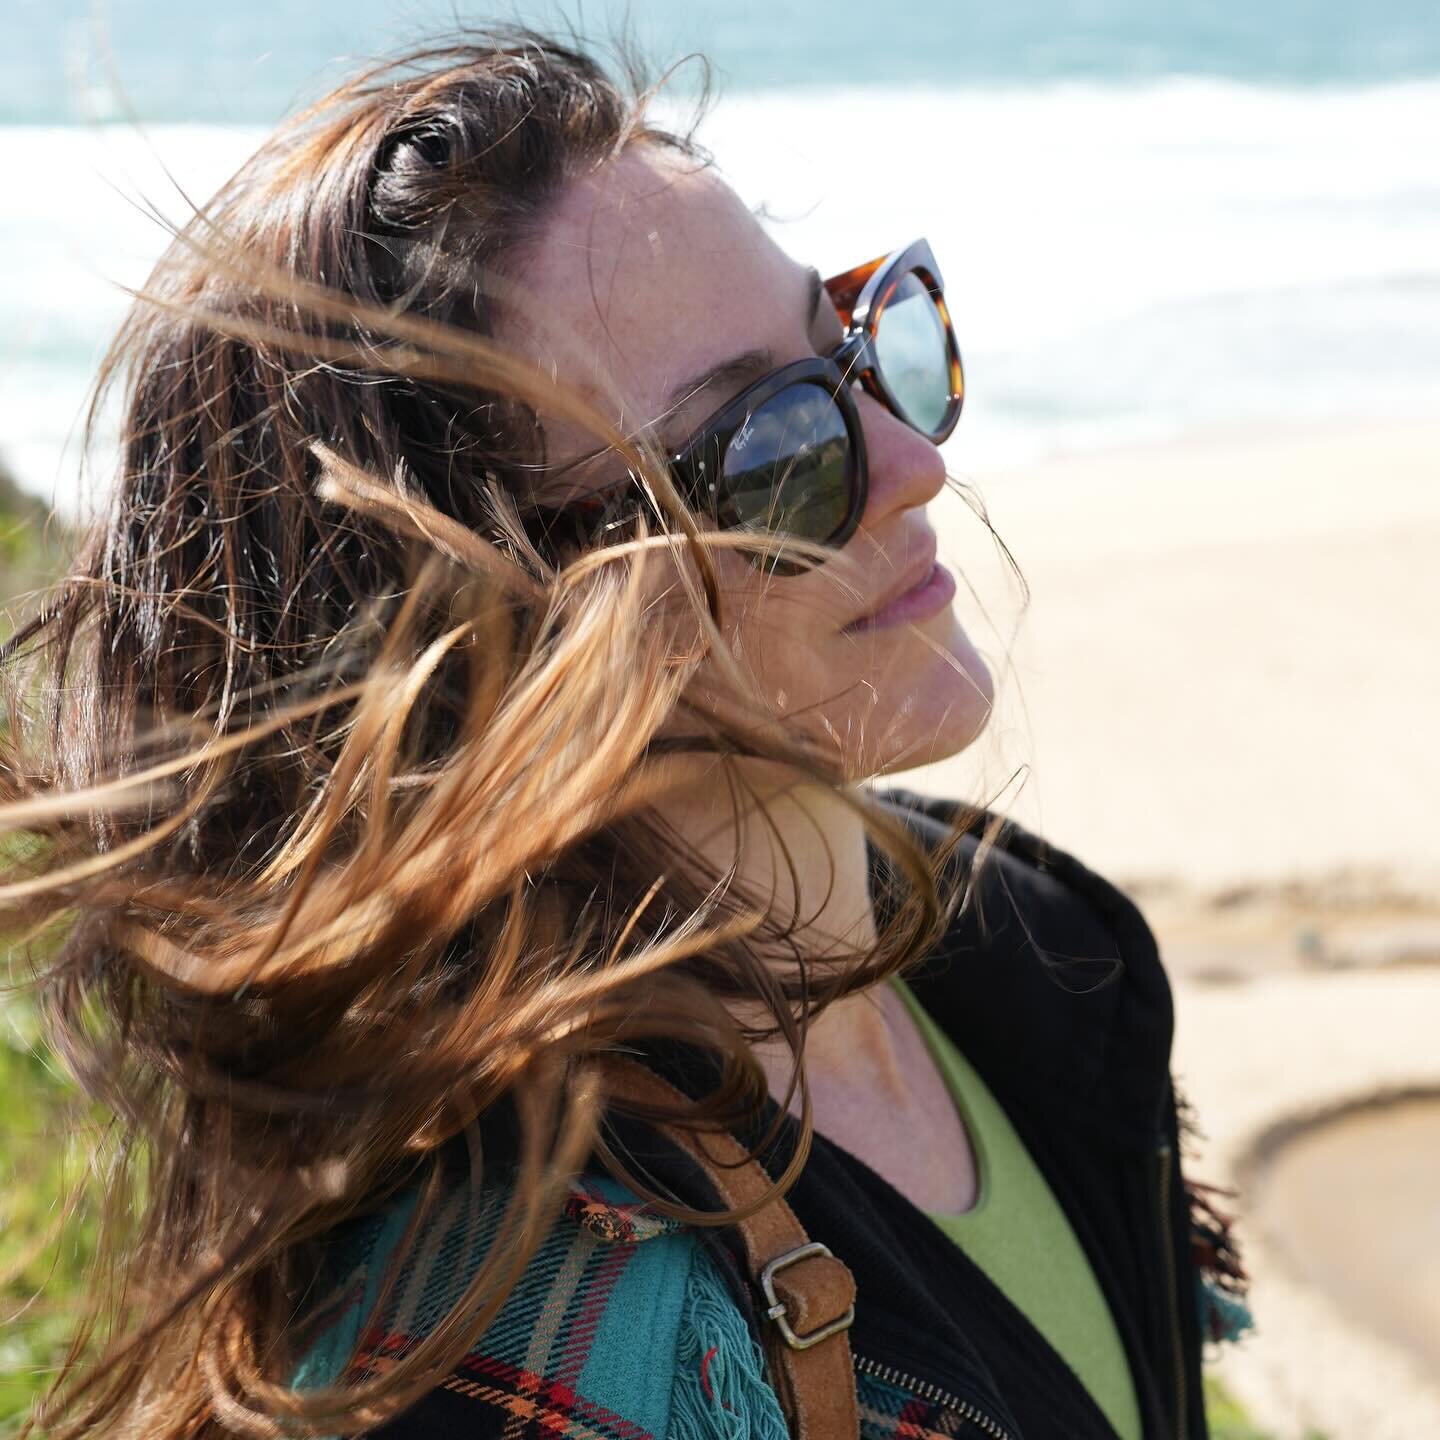 Auric clearing 🌬️🌬️🌬️🌬️

Pre-eclipse elemental healing, the wind was relentless today, cold, deep gusts from the north. The intended yoga photos dissolved into Mexican food and an afternoon meander down the coast. 

In my Medusa vibes here 💯

An